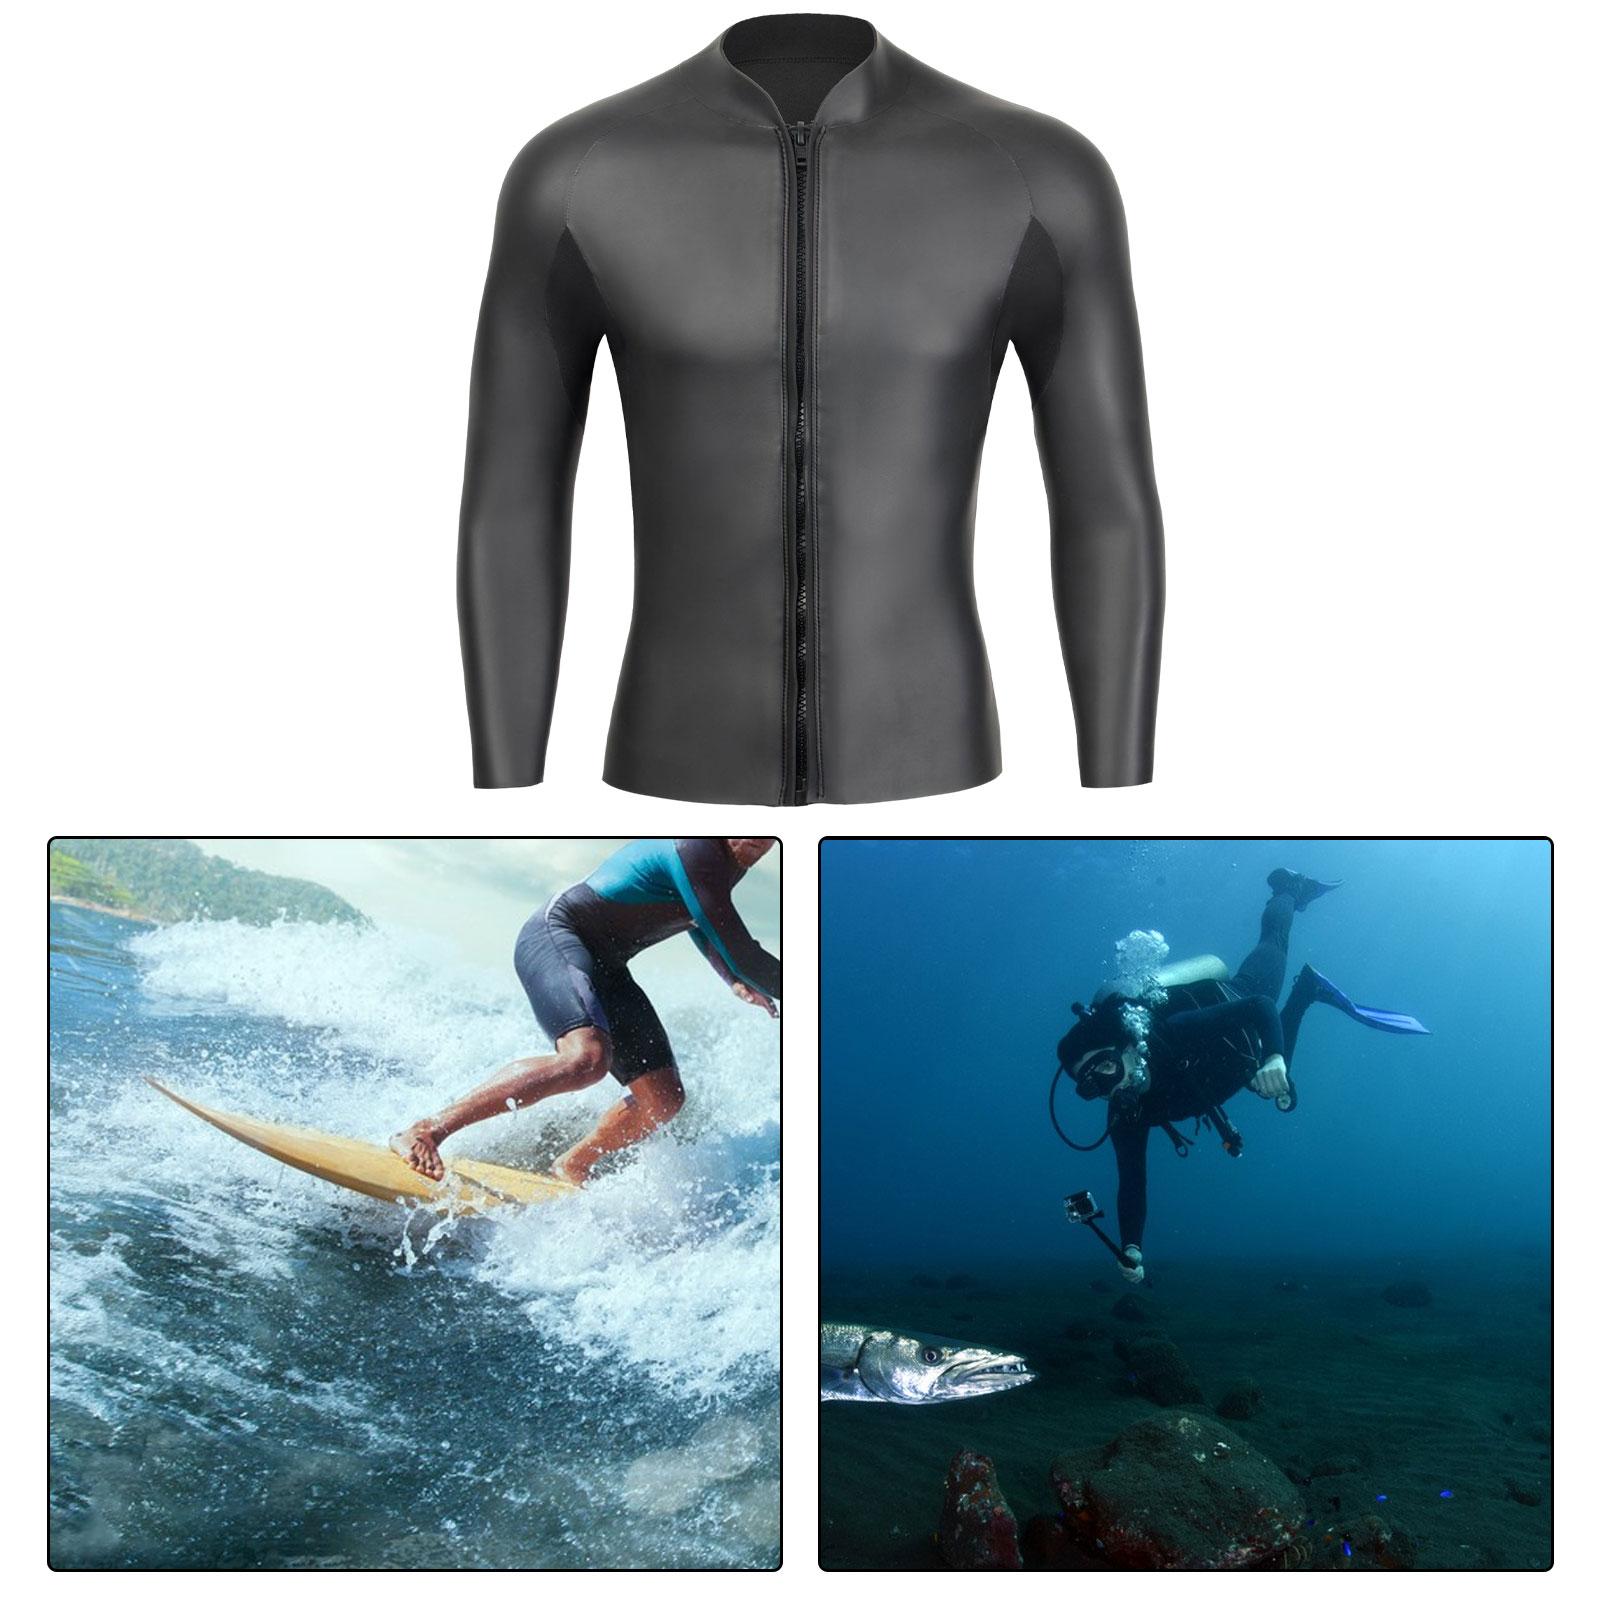 Wetsuit Top 3mm with Zipper Diving Suit for Underwater Kayaking Water Sports XL